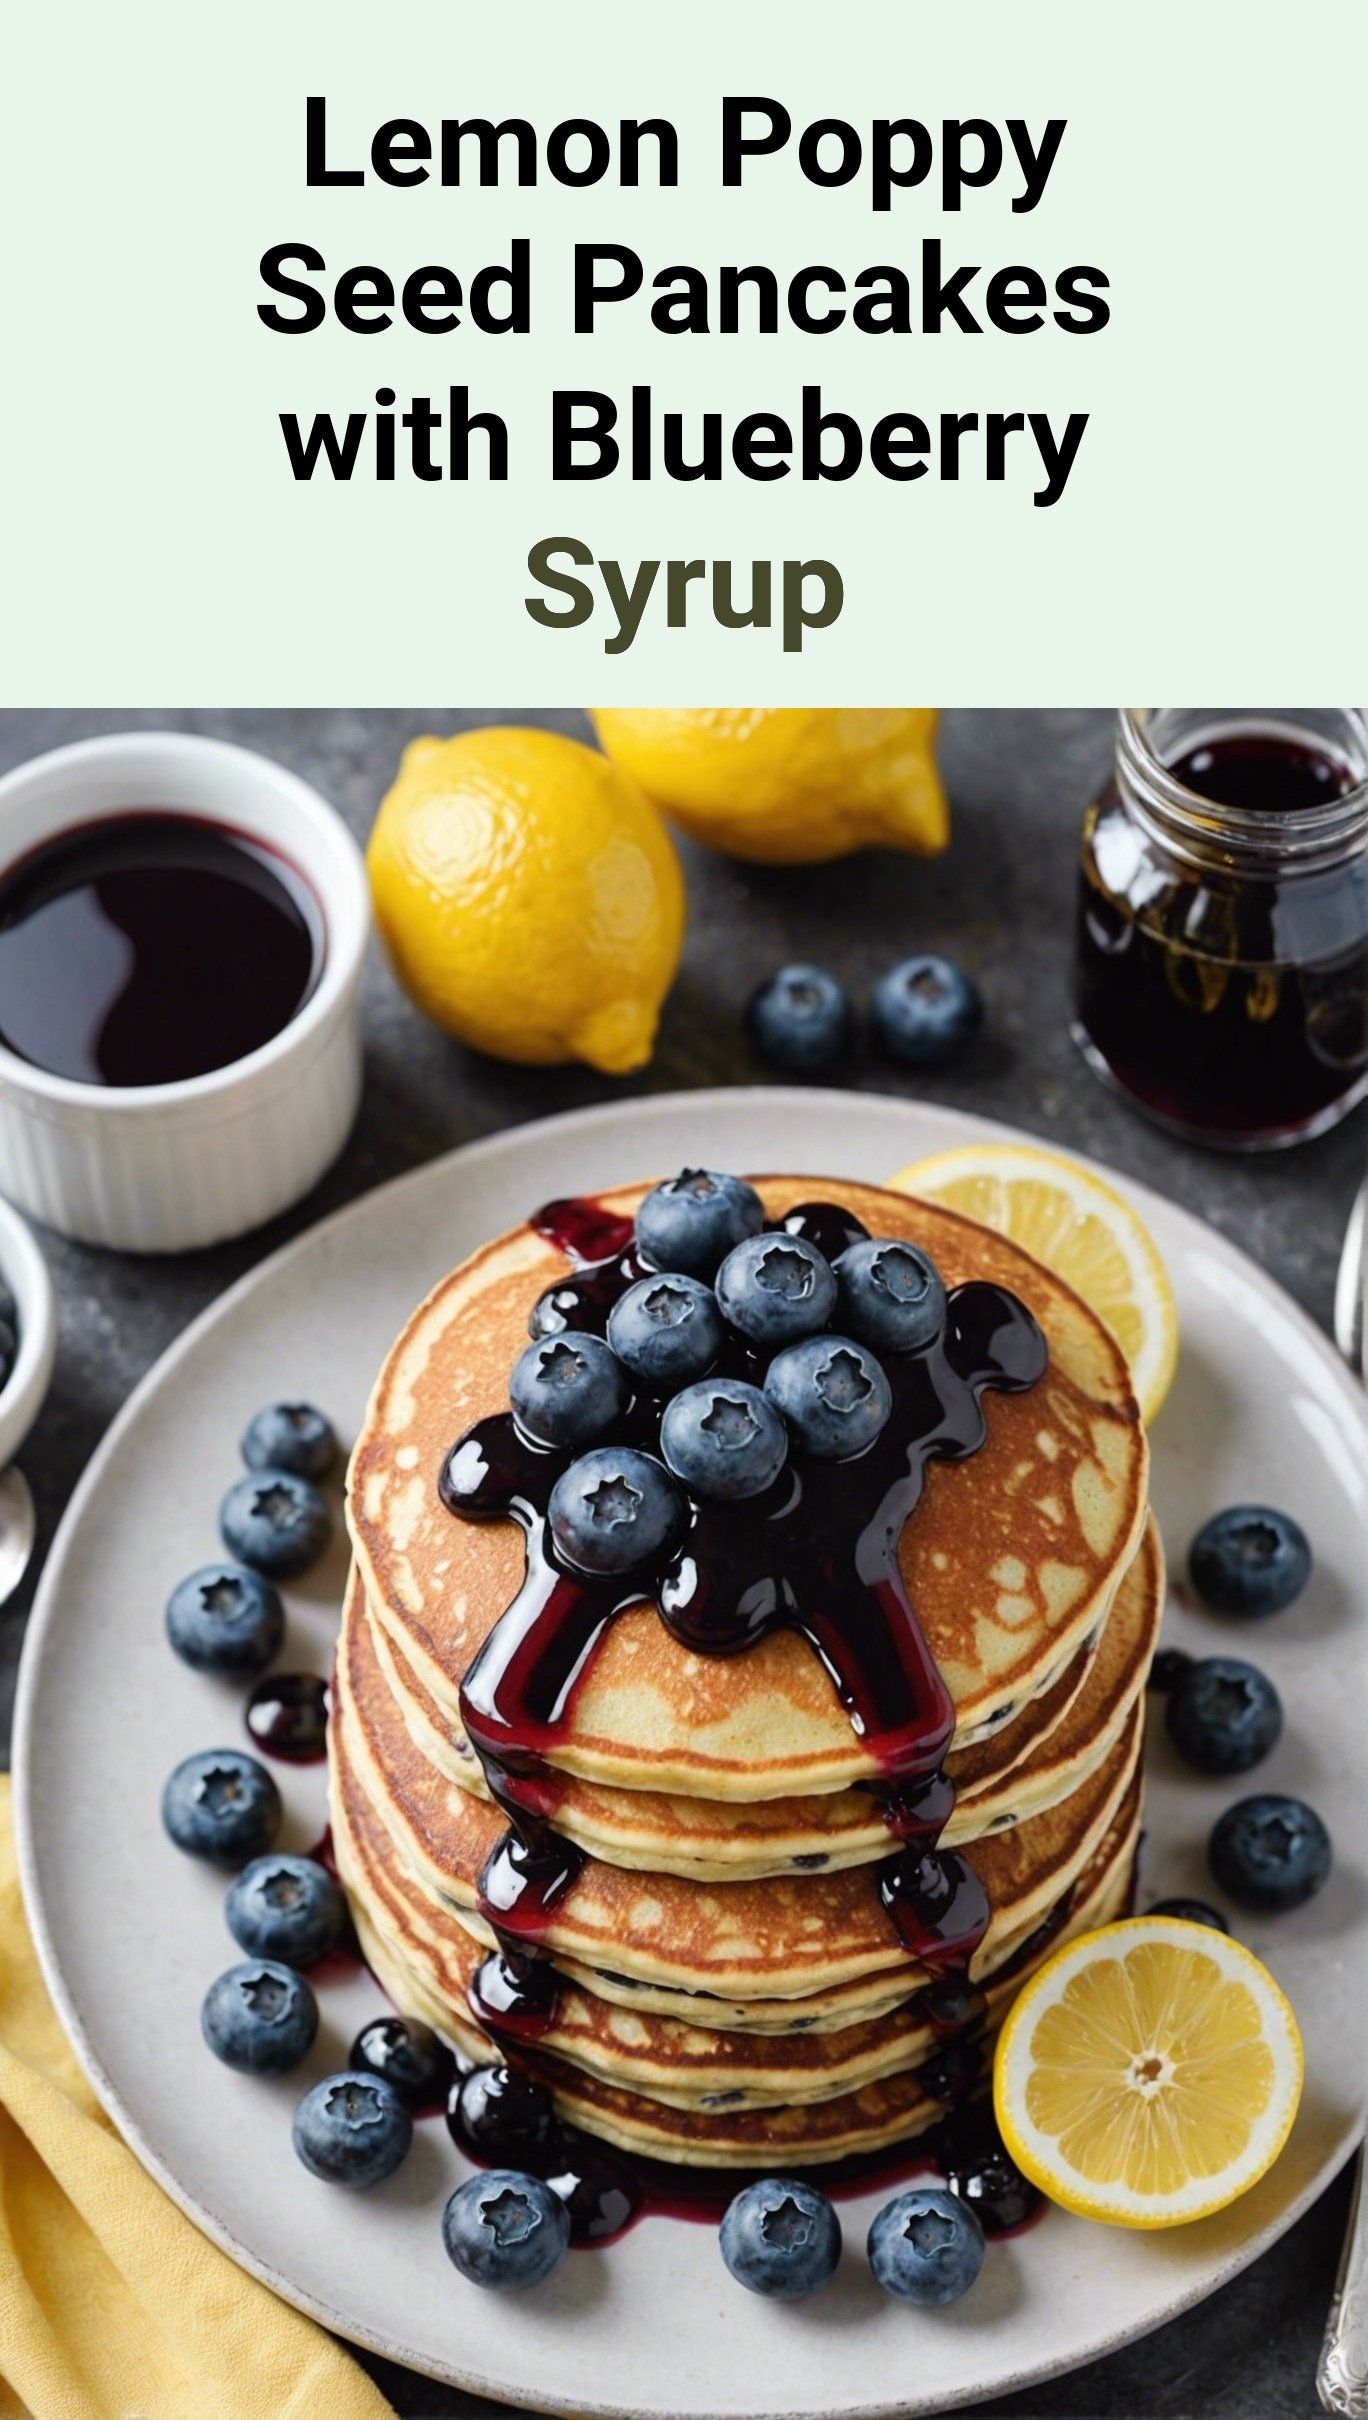 Lemon Poppy Seed Pancakes with Blueberry Syrup